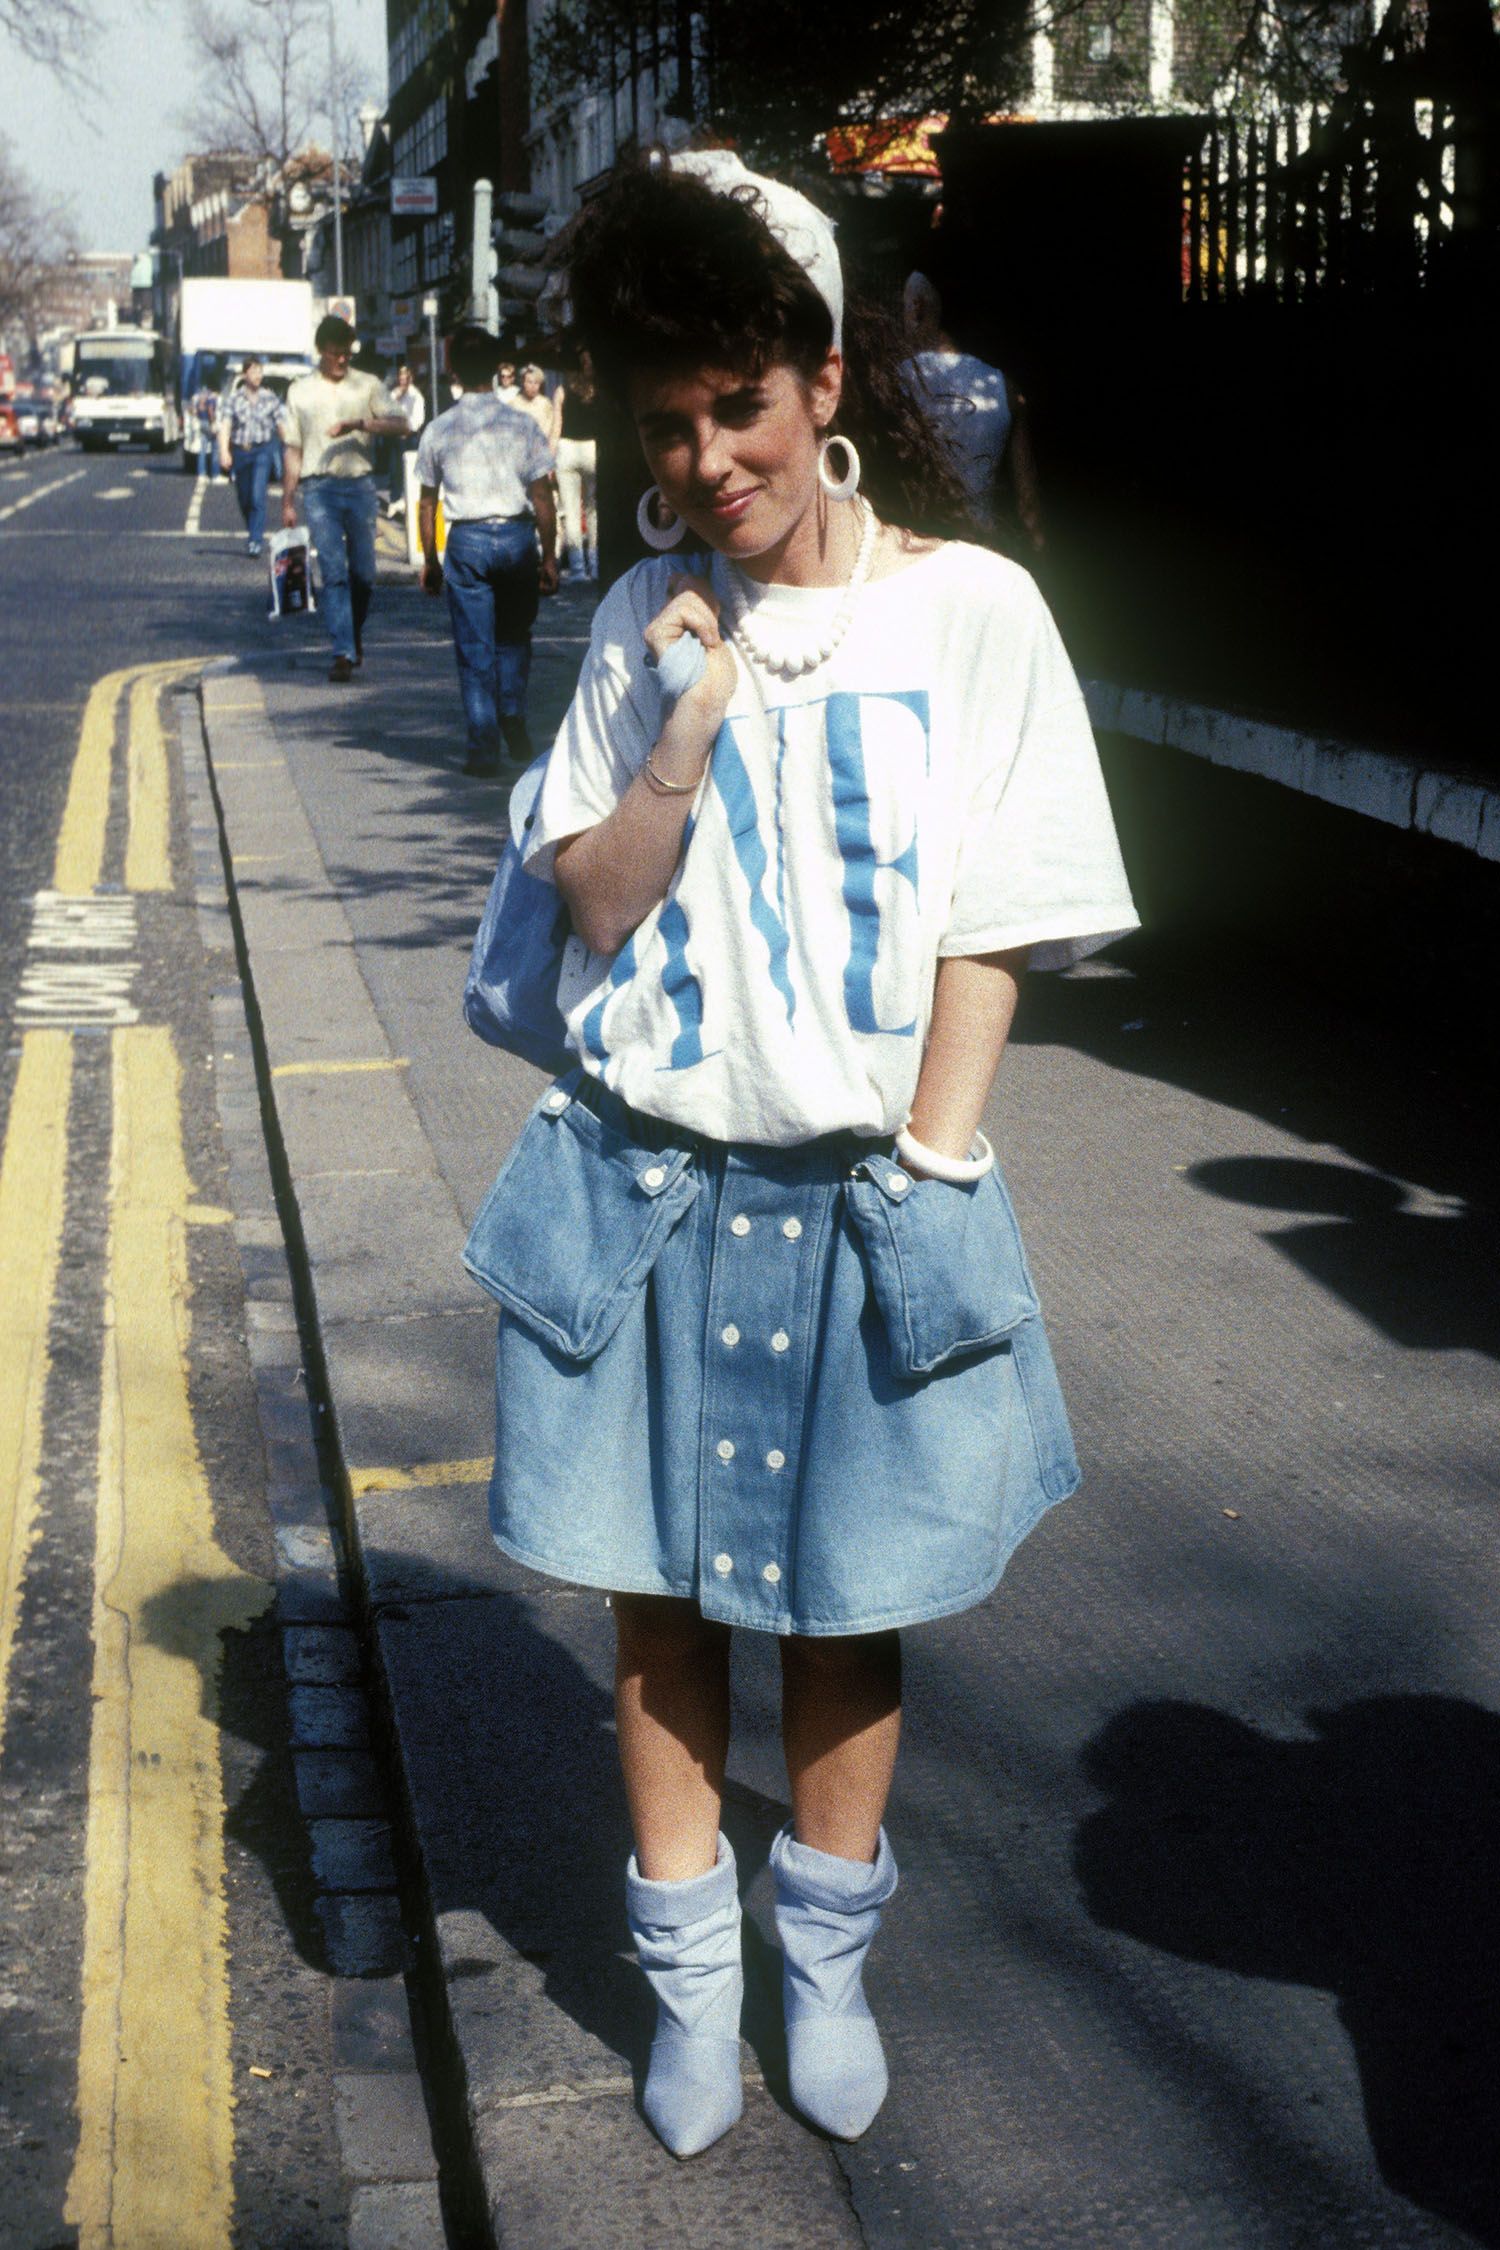 Vintage 80s Outfits and Fashion Trends